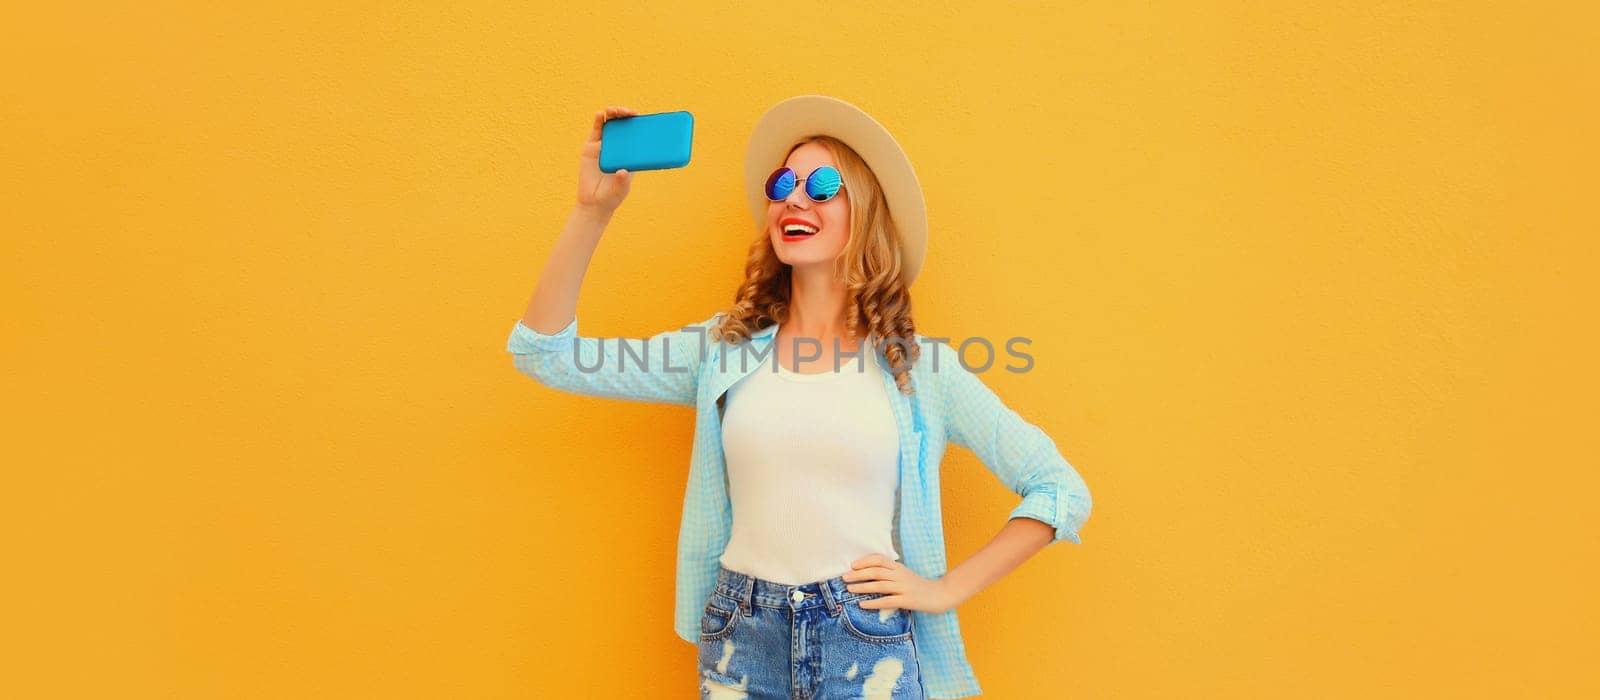 Portrait of happy smiling young woman taking selfie with smartphone wearing straw hat on yellow background